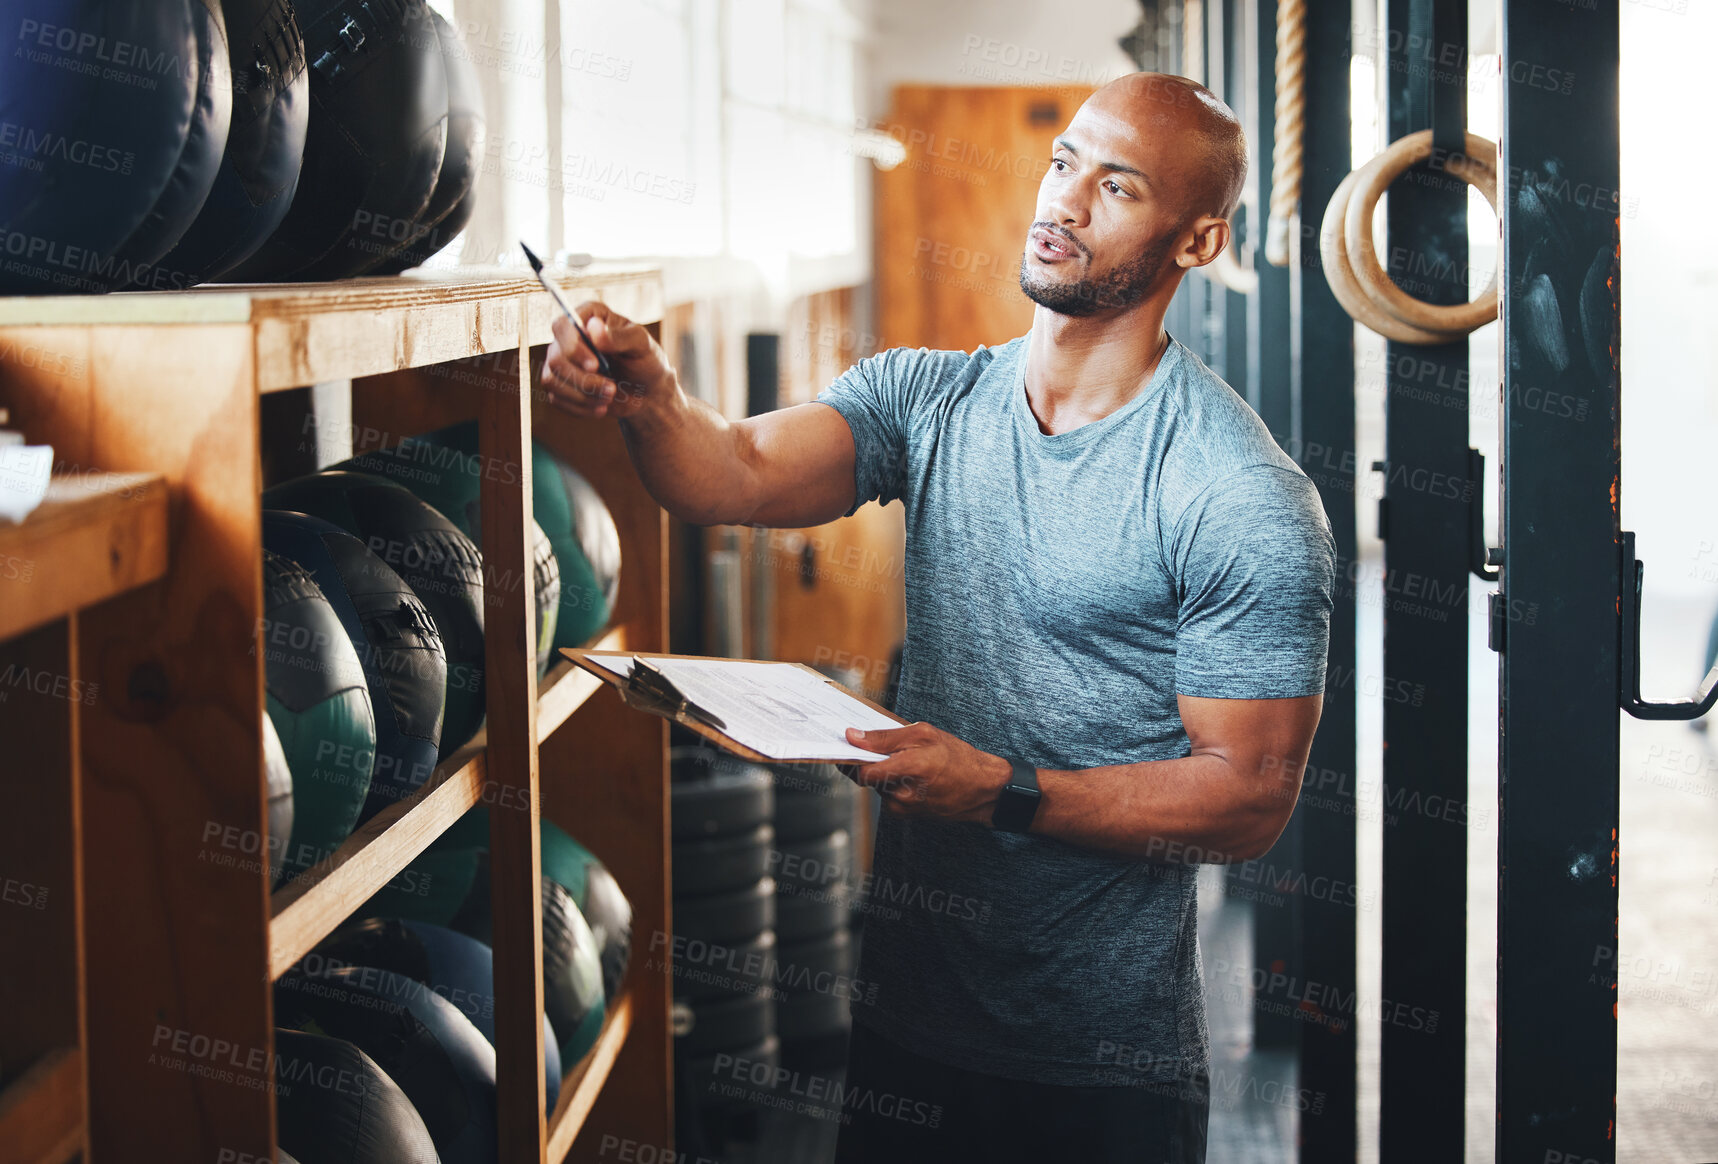 Buy stock photo Shot of a muscular young man using a clipboard while checking equipment in a gym